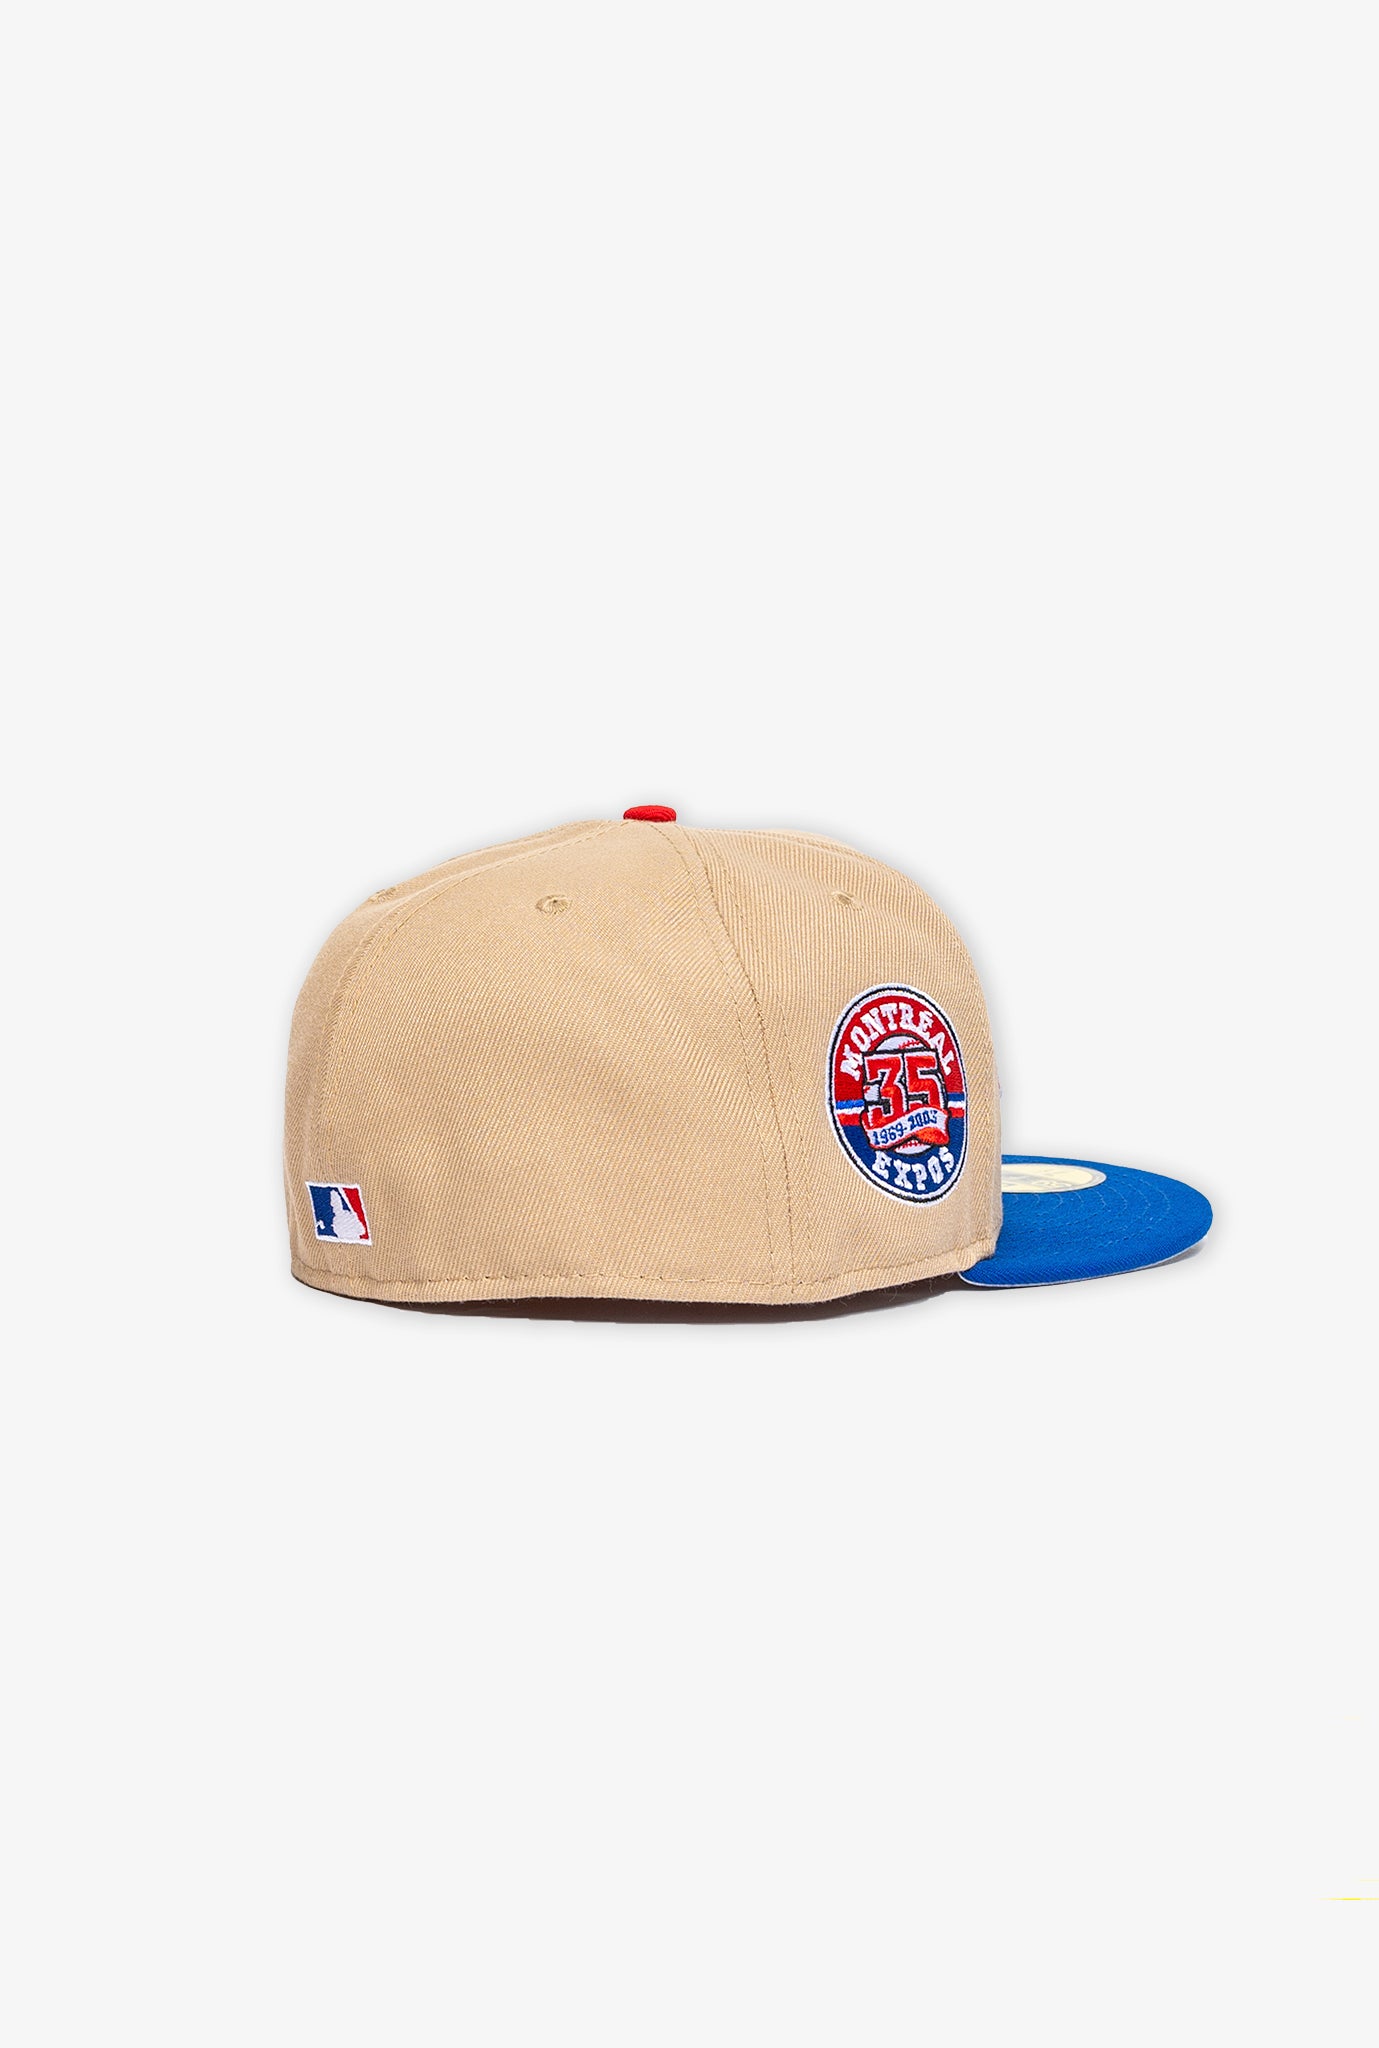 Montreal Expos 35th Anniversary 59FIFTY - Camel/Royal